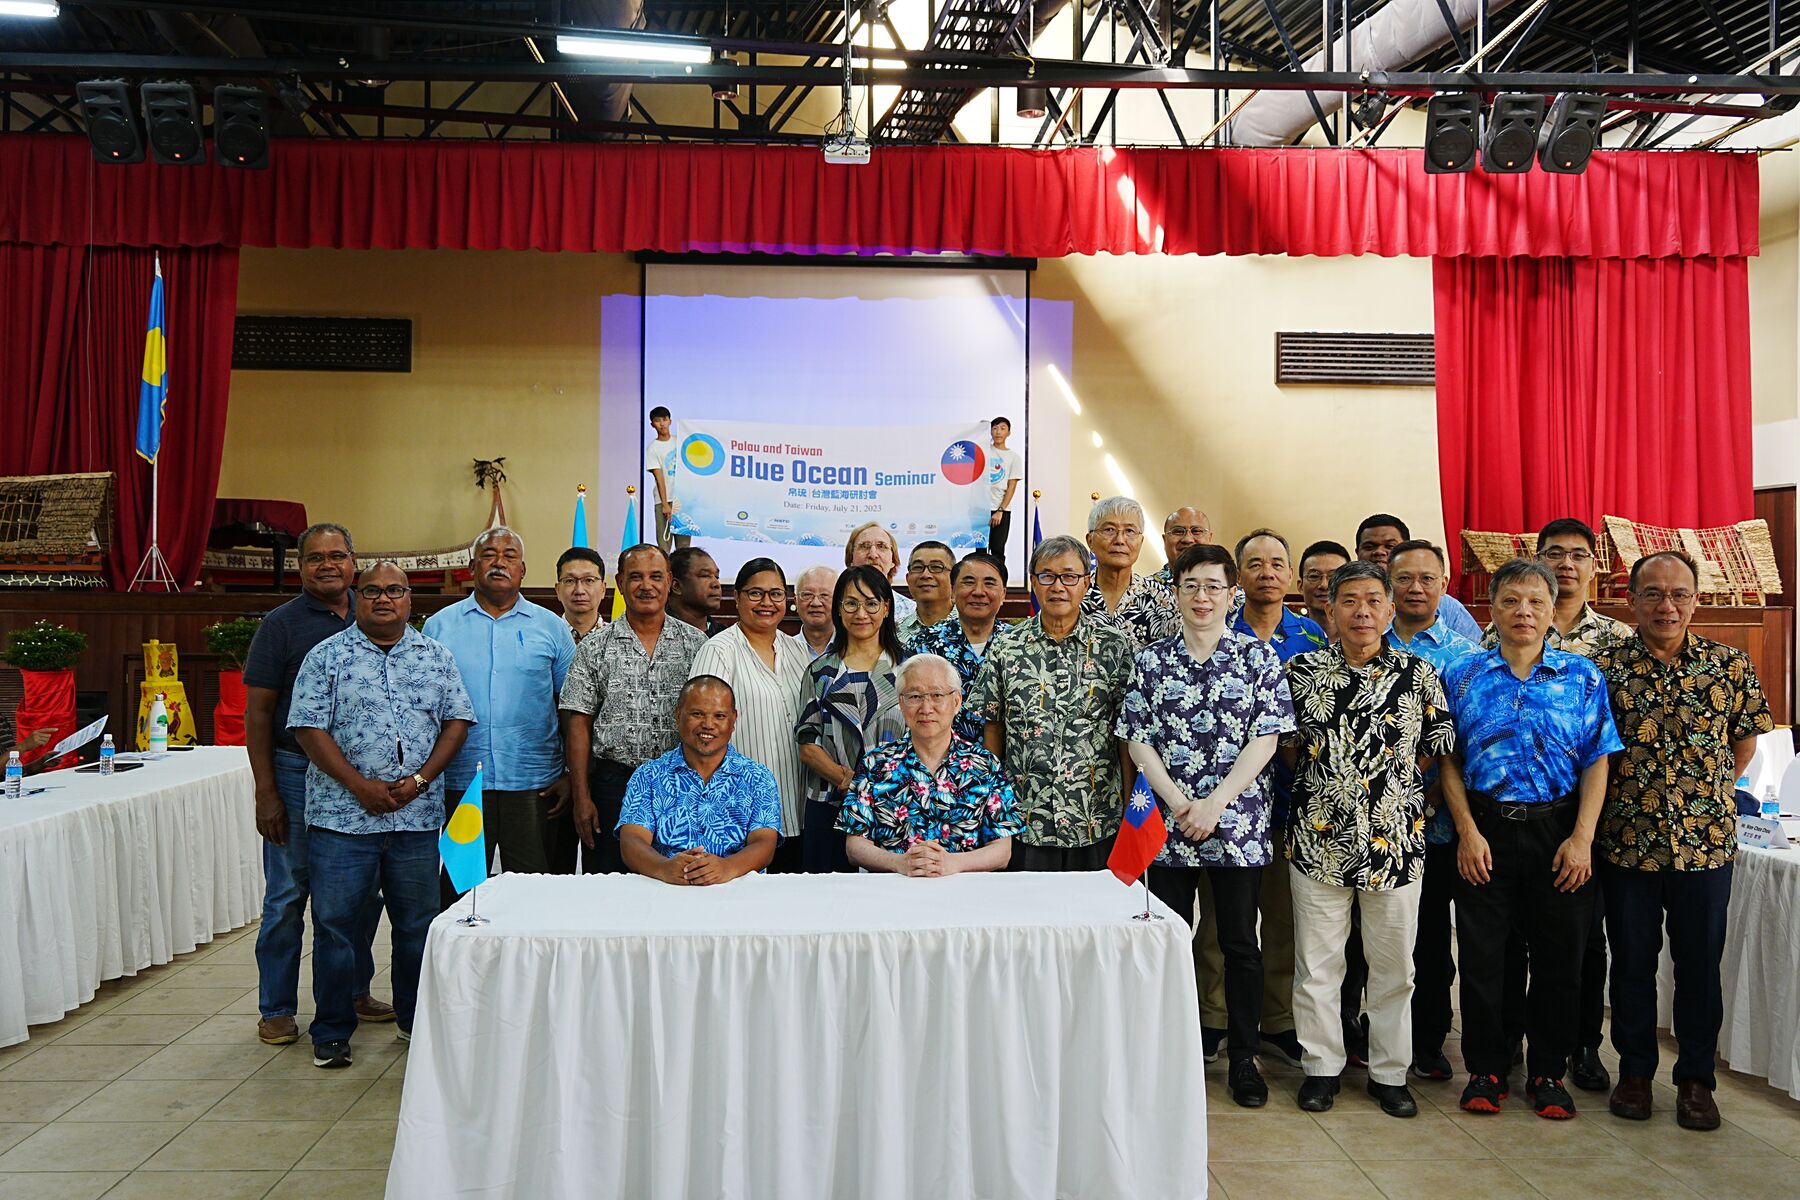 NSYSU, Minister of Agriculture, Fisheries, and the Environment of Palau, Palau Community College, and Palau International Coral Reef Center announced the collaboration by signing a memorandum of understanding (MOU) at the Palau and Taiwan Blue Ocean Seminar. Through this collaboration, NSYSU and Palau’s academic institutions will collectively initiate various projects of oceanography, such as blue carbon economy, climate change, marine ecological system conservation, and marine biodiversity